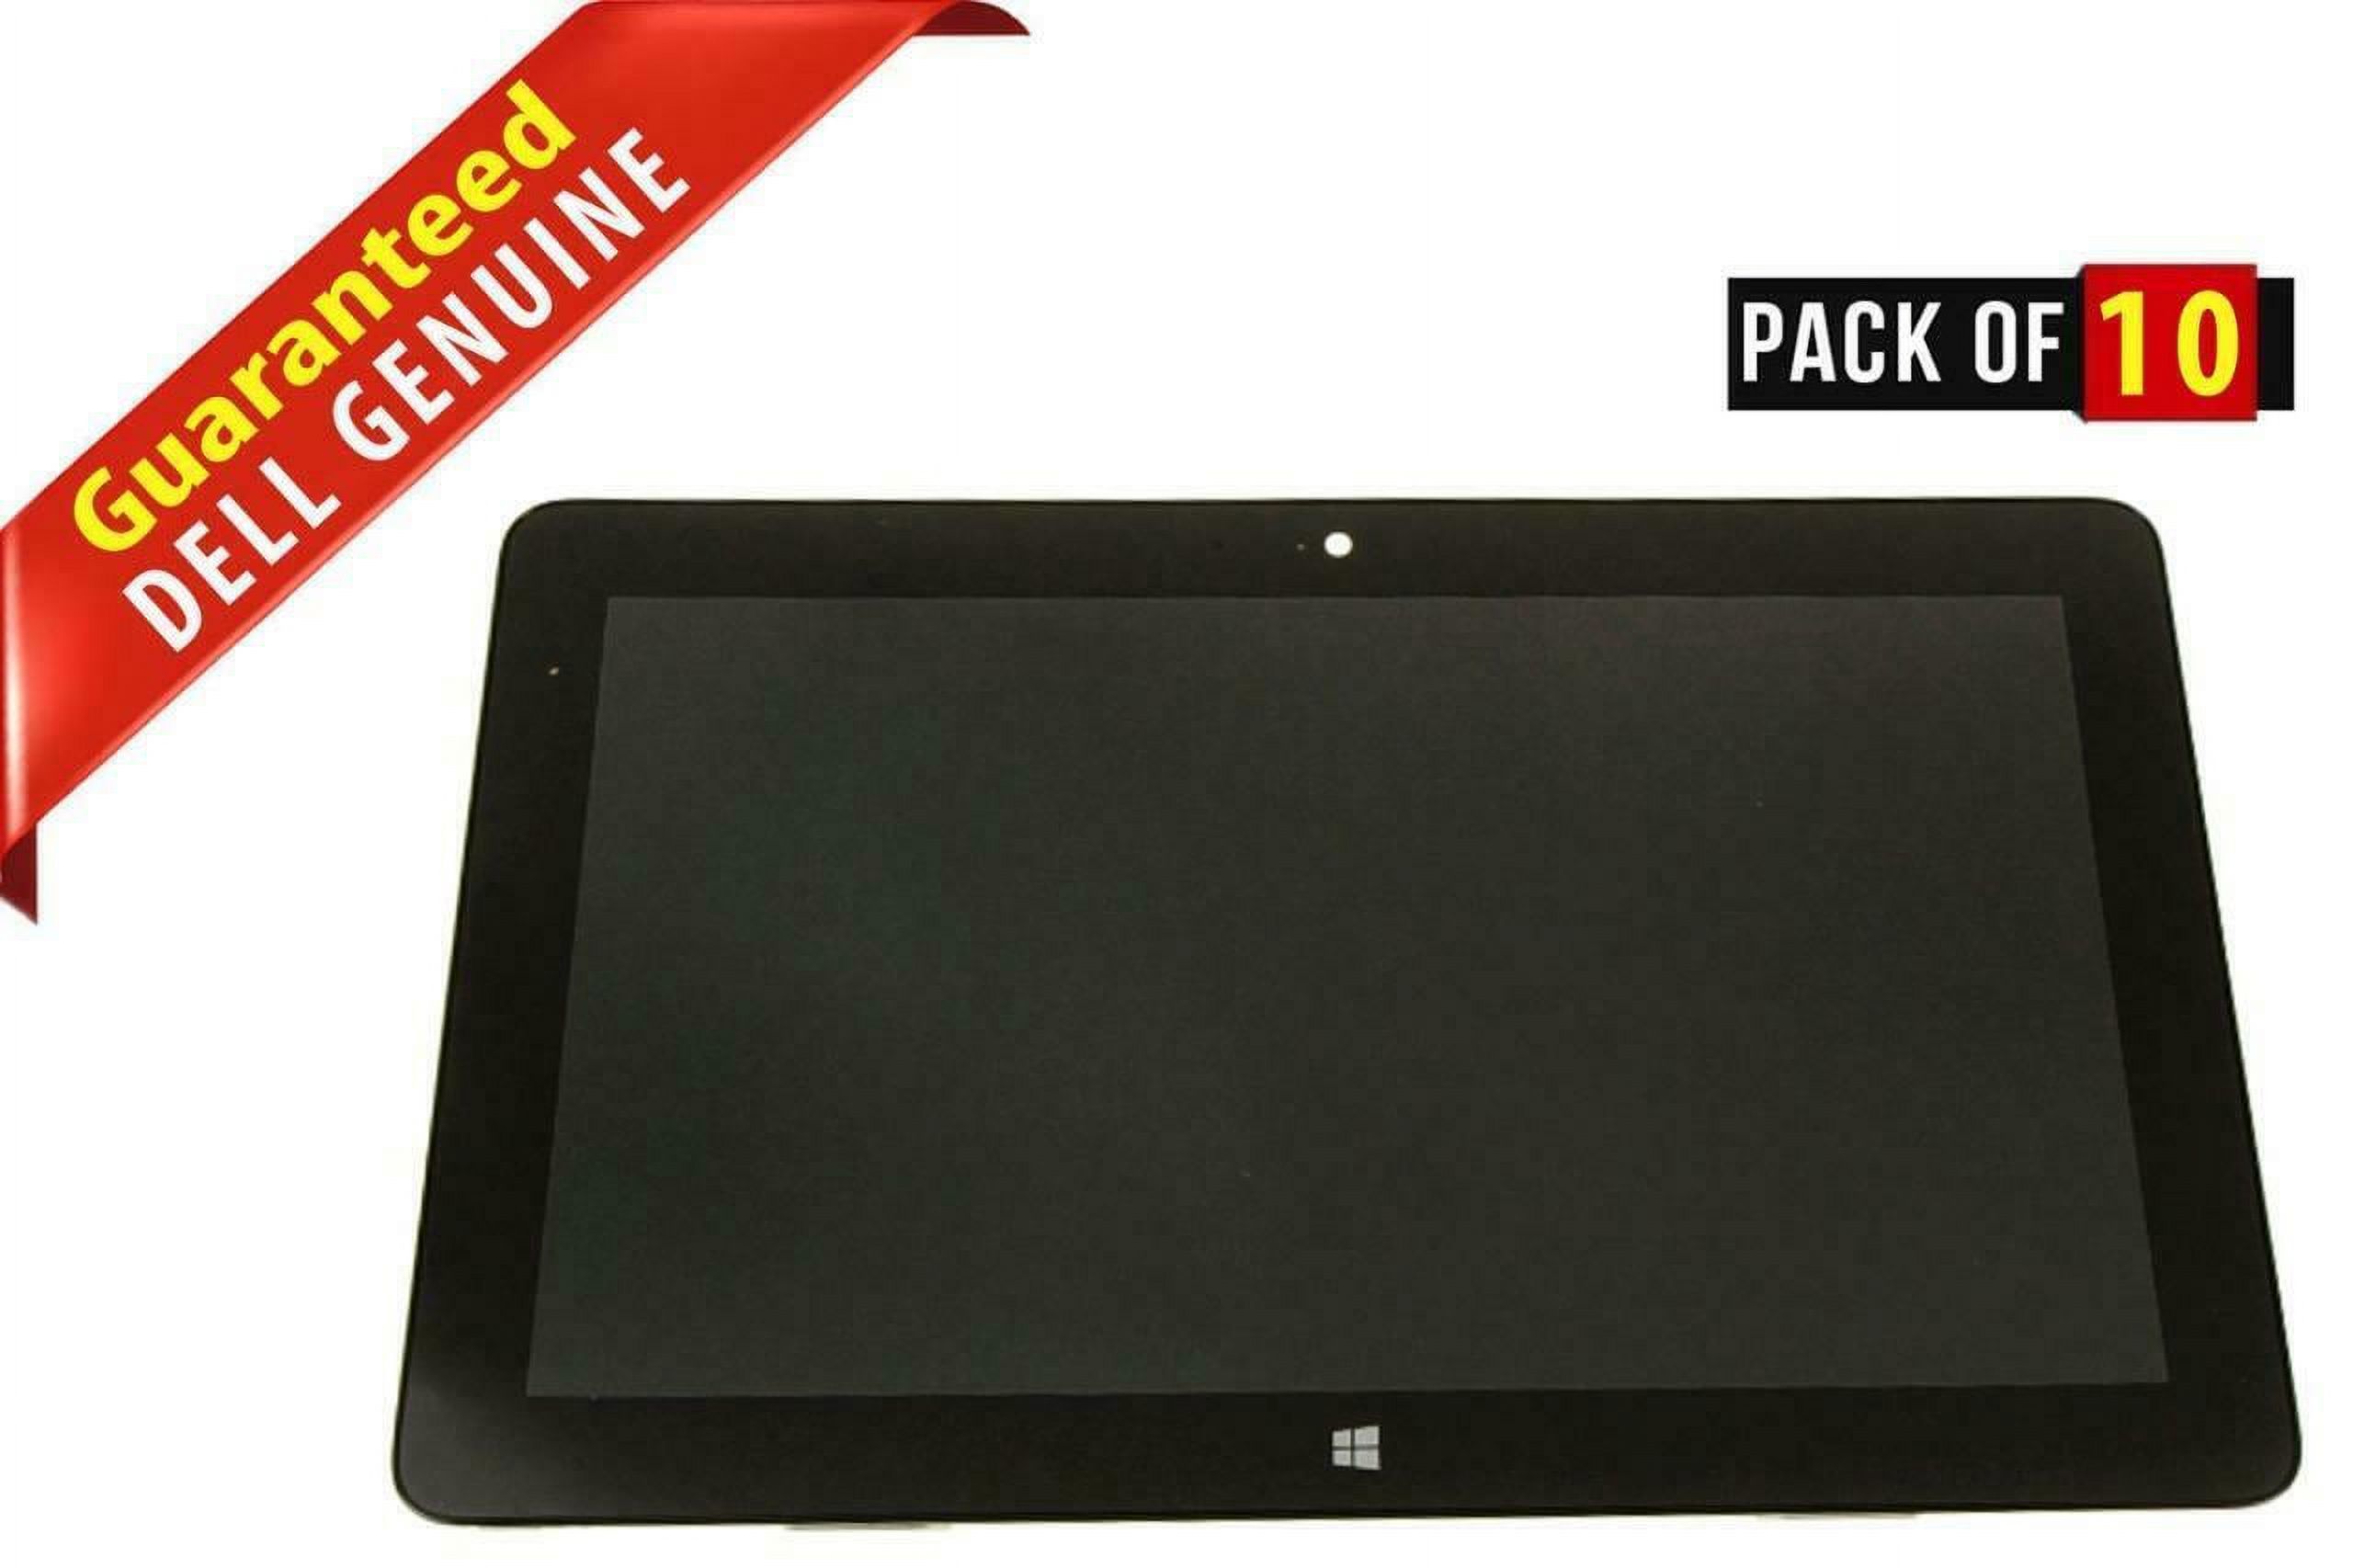 Lot 10 V4TTN OEM Dell Venue 11 Pro 5130 Tablet 10.8" Touchscreen LED LCD Screen(New) - image 1 of 5